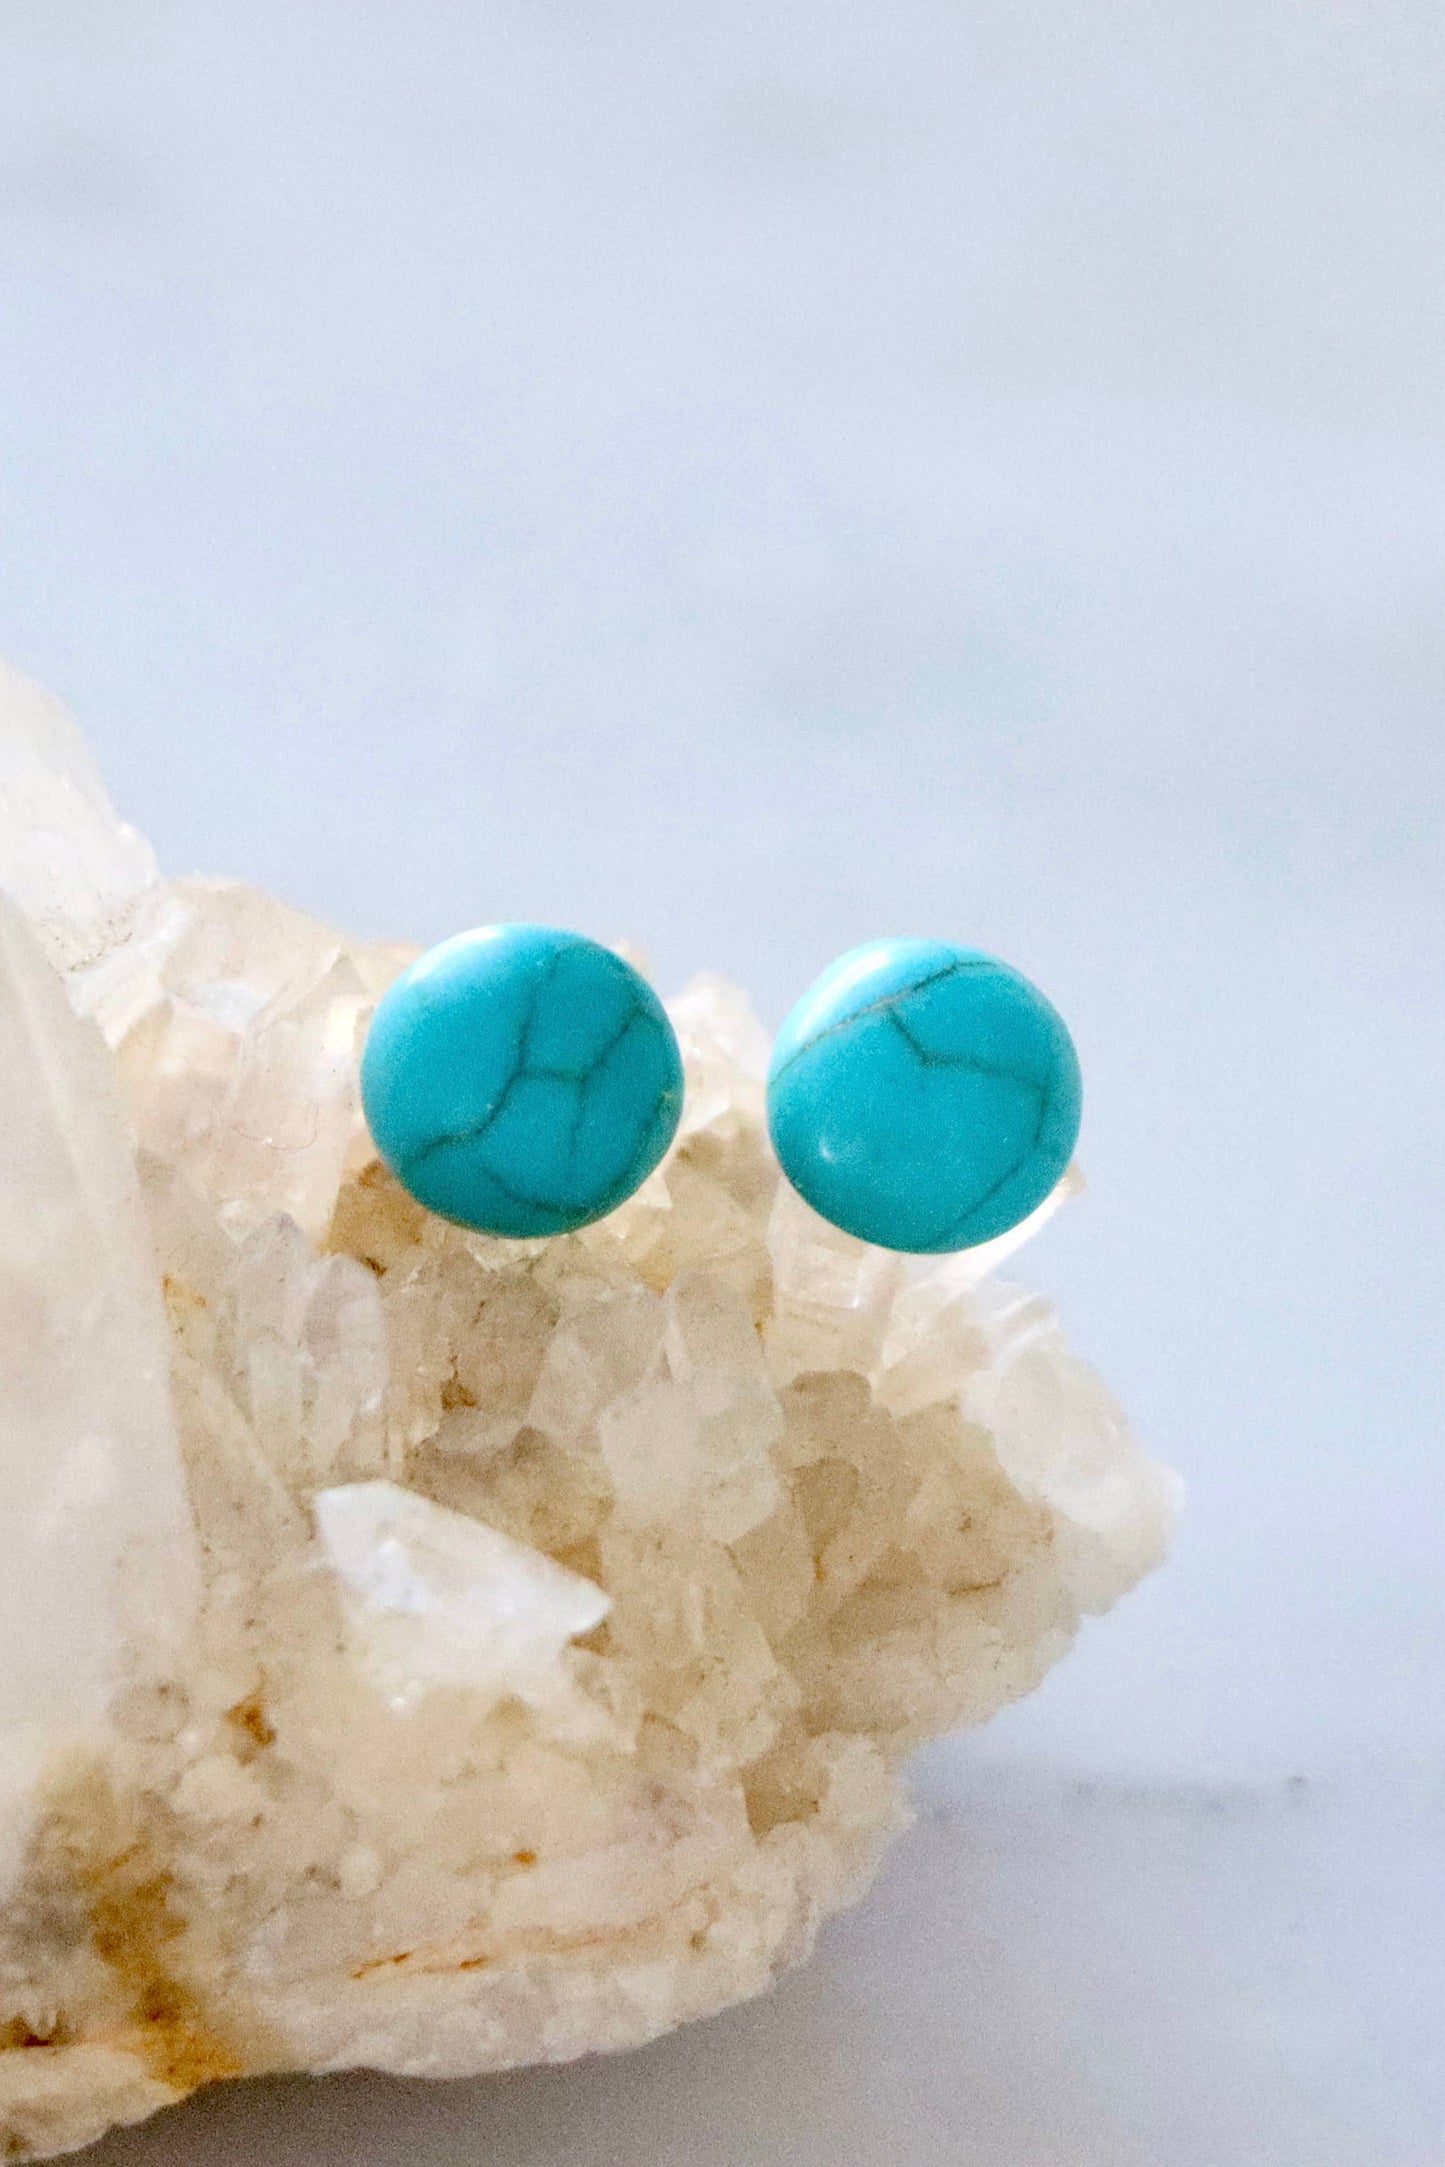 Howlite Turquoise Stud Earrings from Sot